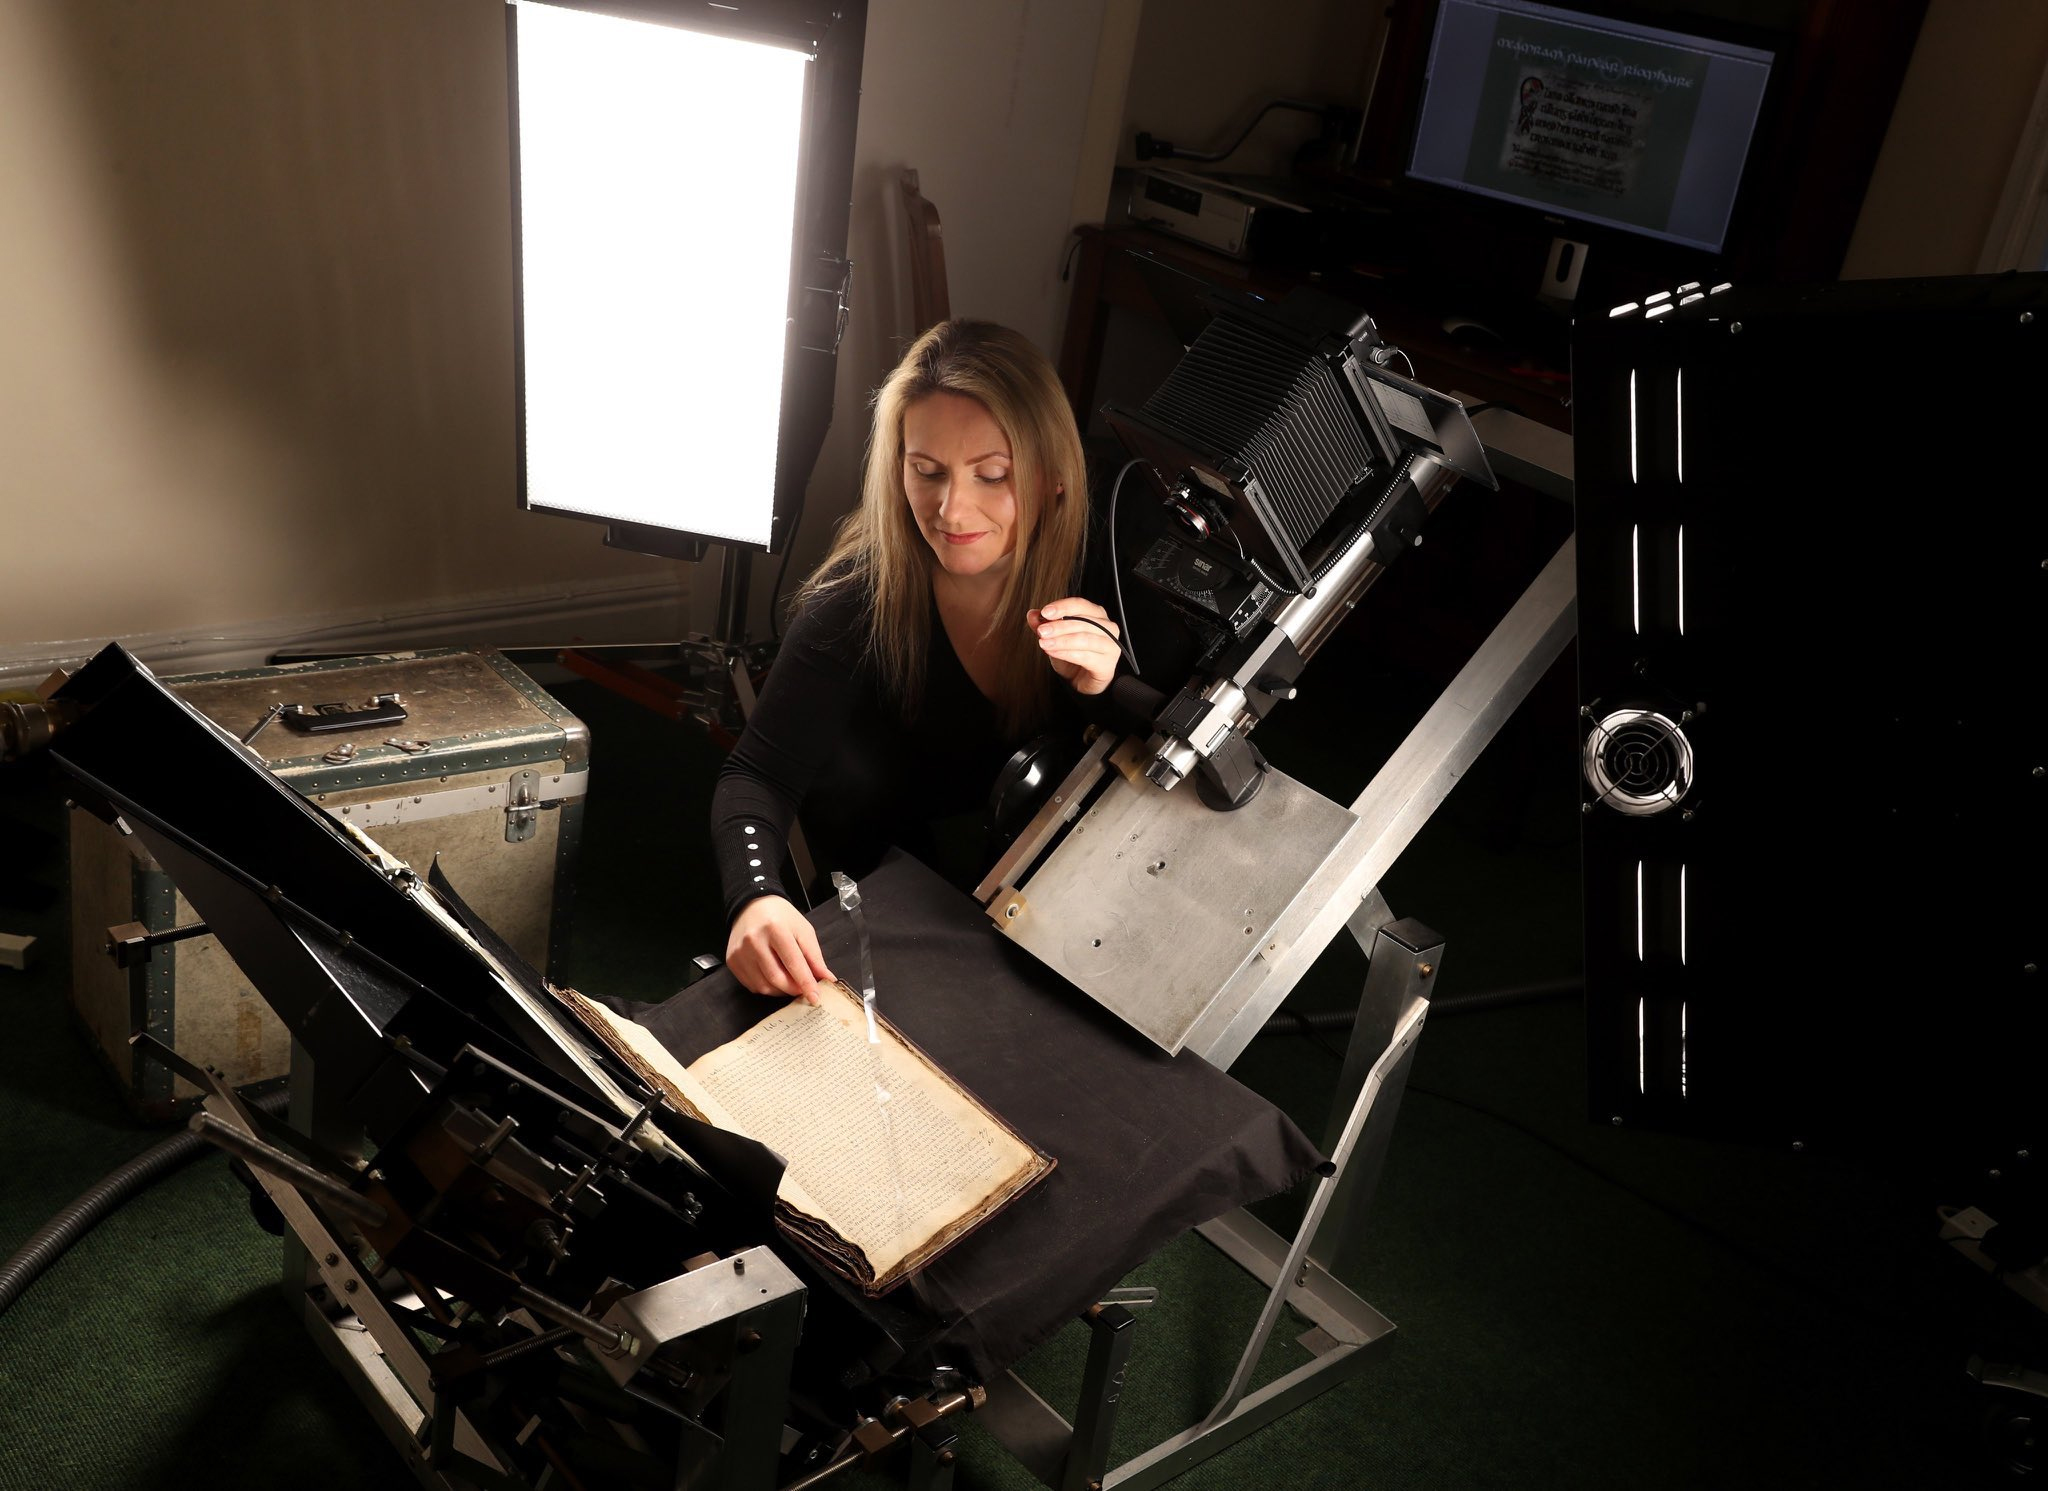 Image showing manuscript on cradle with lights and camera